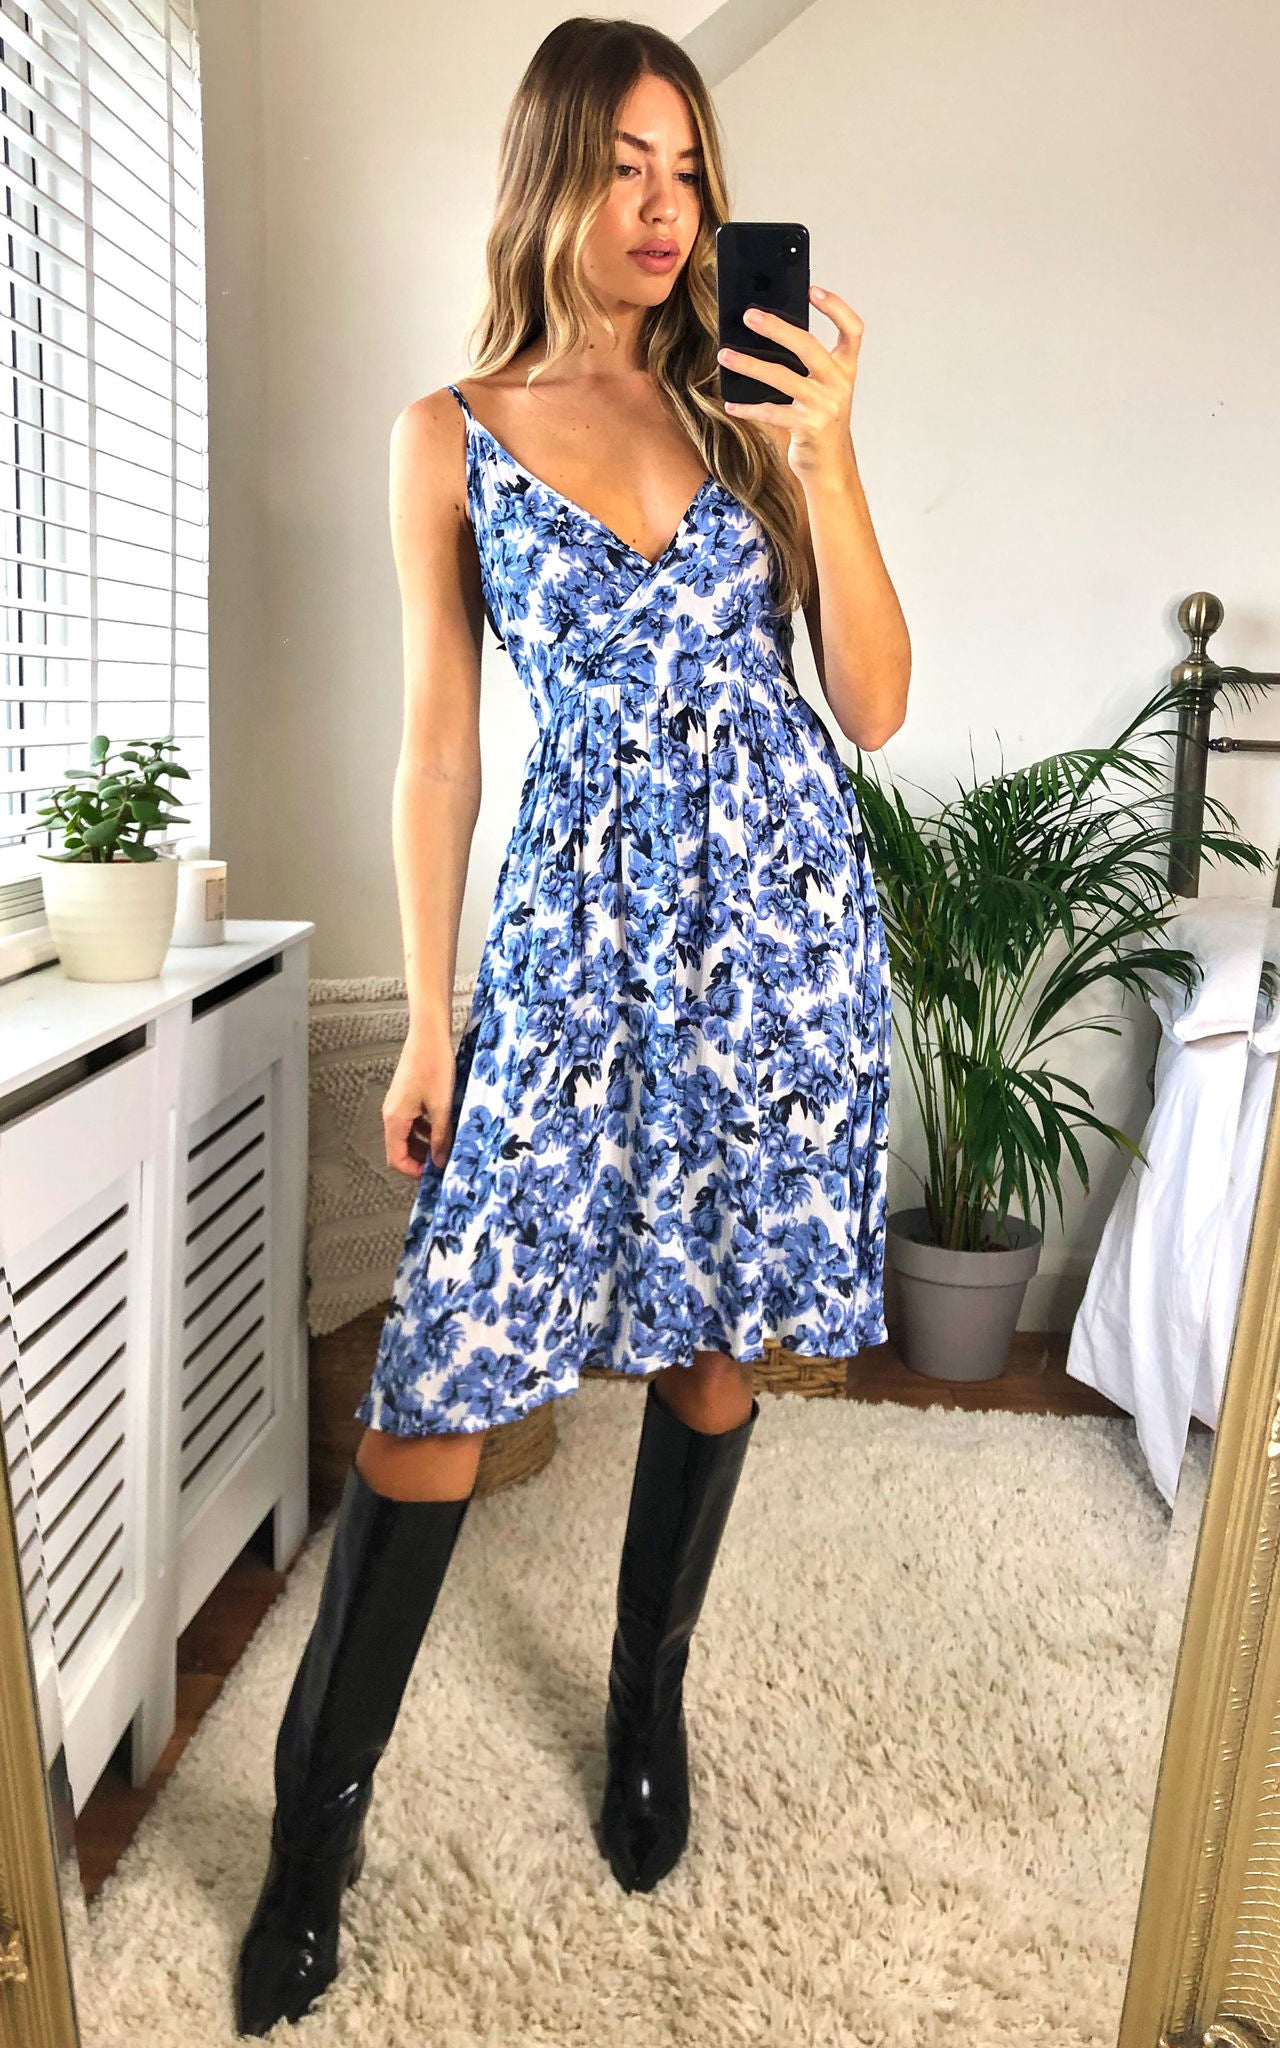 Unique21 V Neck Floral Spaghetti Strap Summer Casual Swing Dress Blue Floral Print On White Base